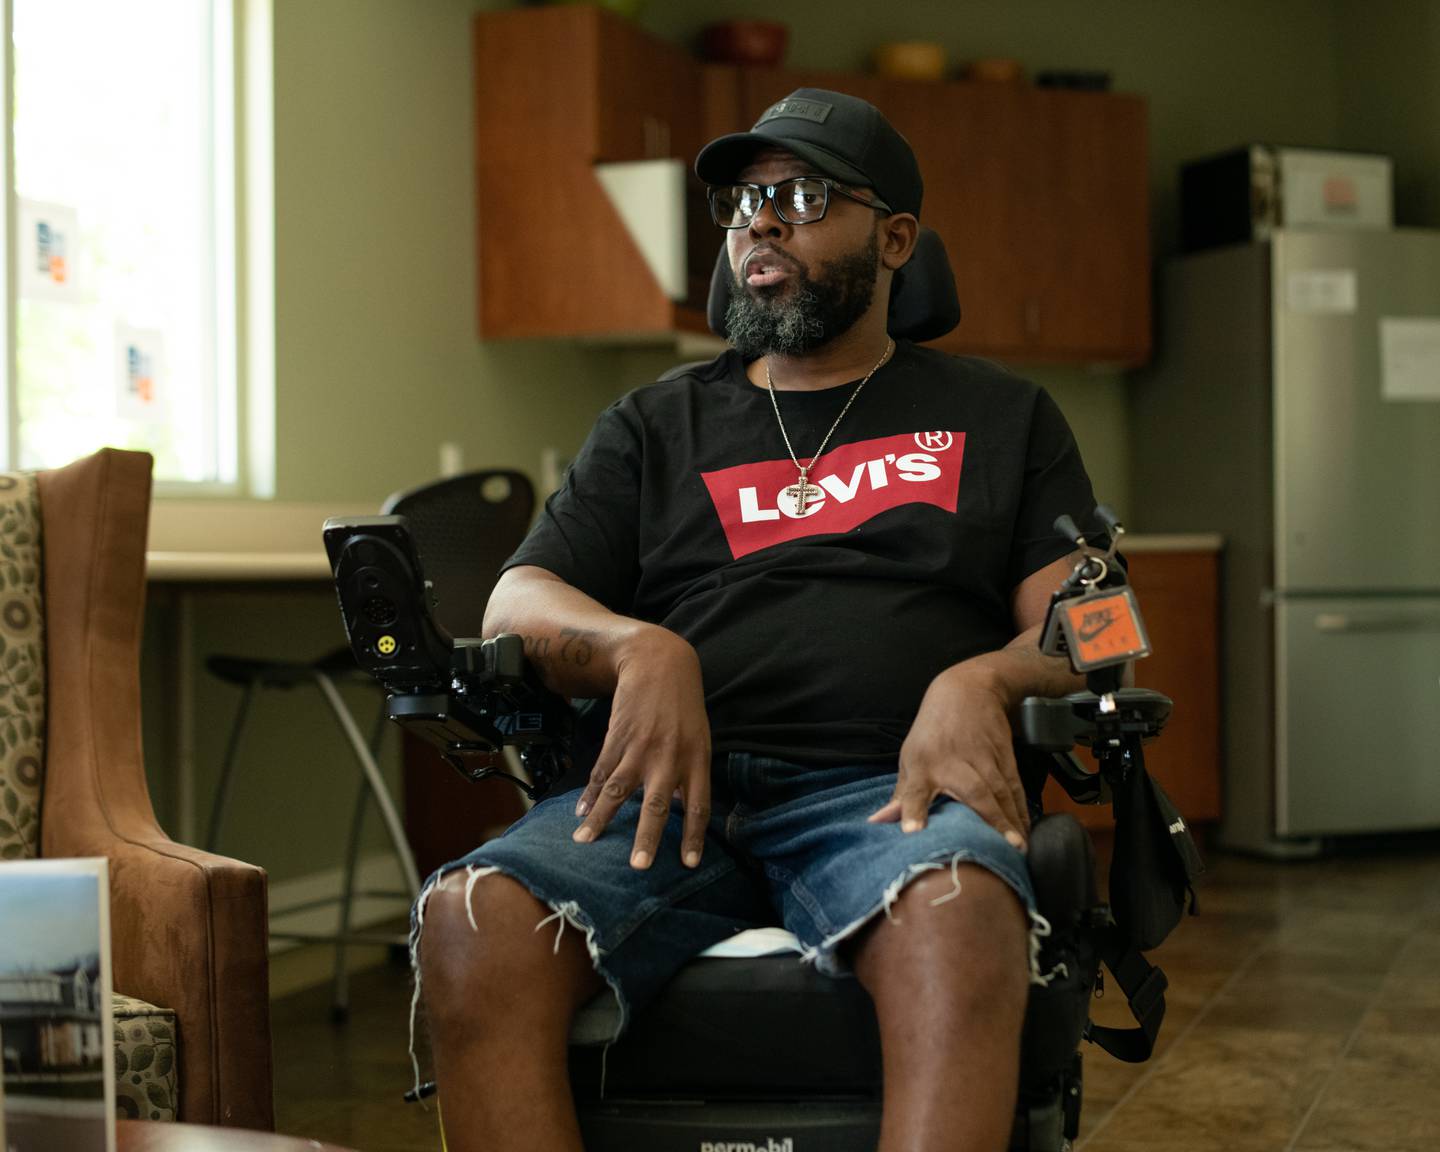 Baltimore Police Detective Ike Carrington is paralyzed from the chest down after being shot in a robbery in 2019, is about to begin his recovery process.